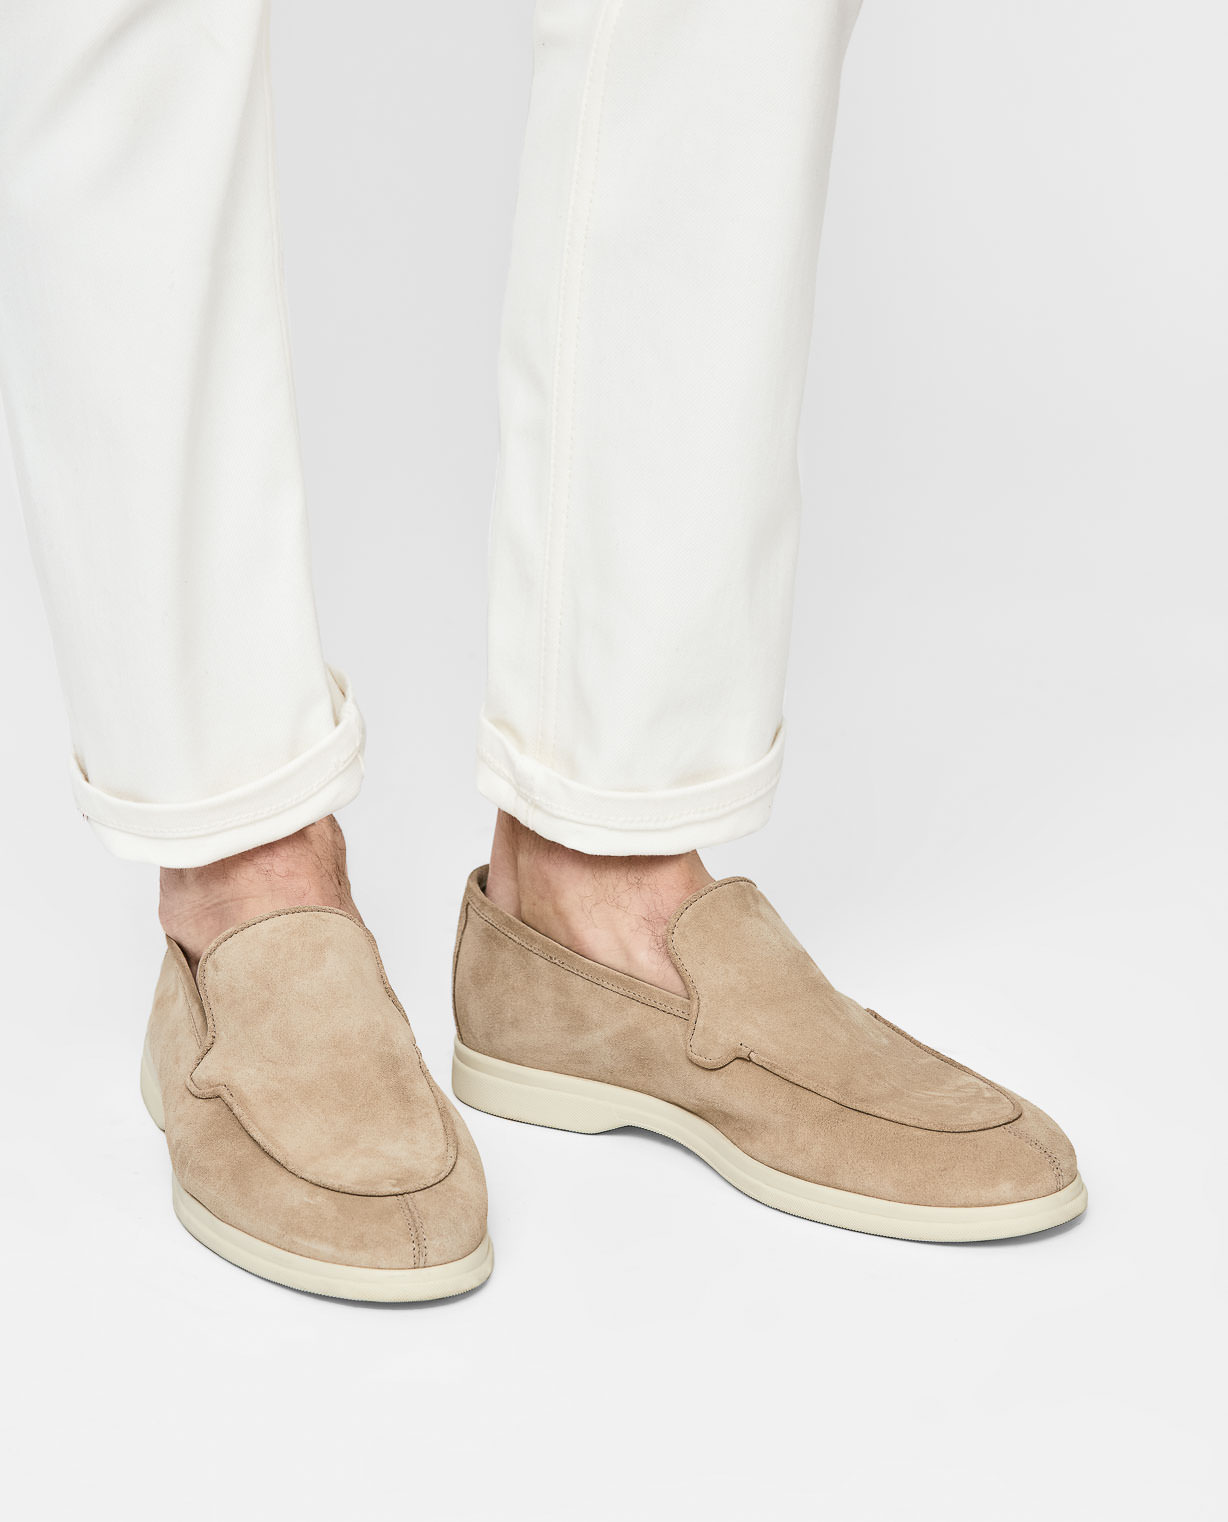 Sand-Suede-Low-Top-City-Loafer-LIS06-custom-shoes-c003506fdd3c4abf9b9ffc4c5f5452d2